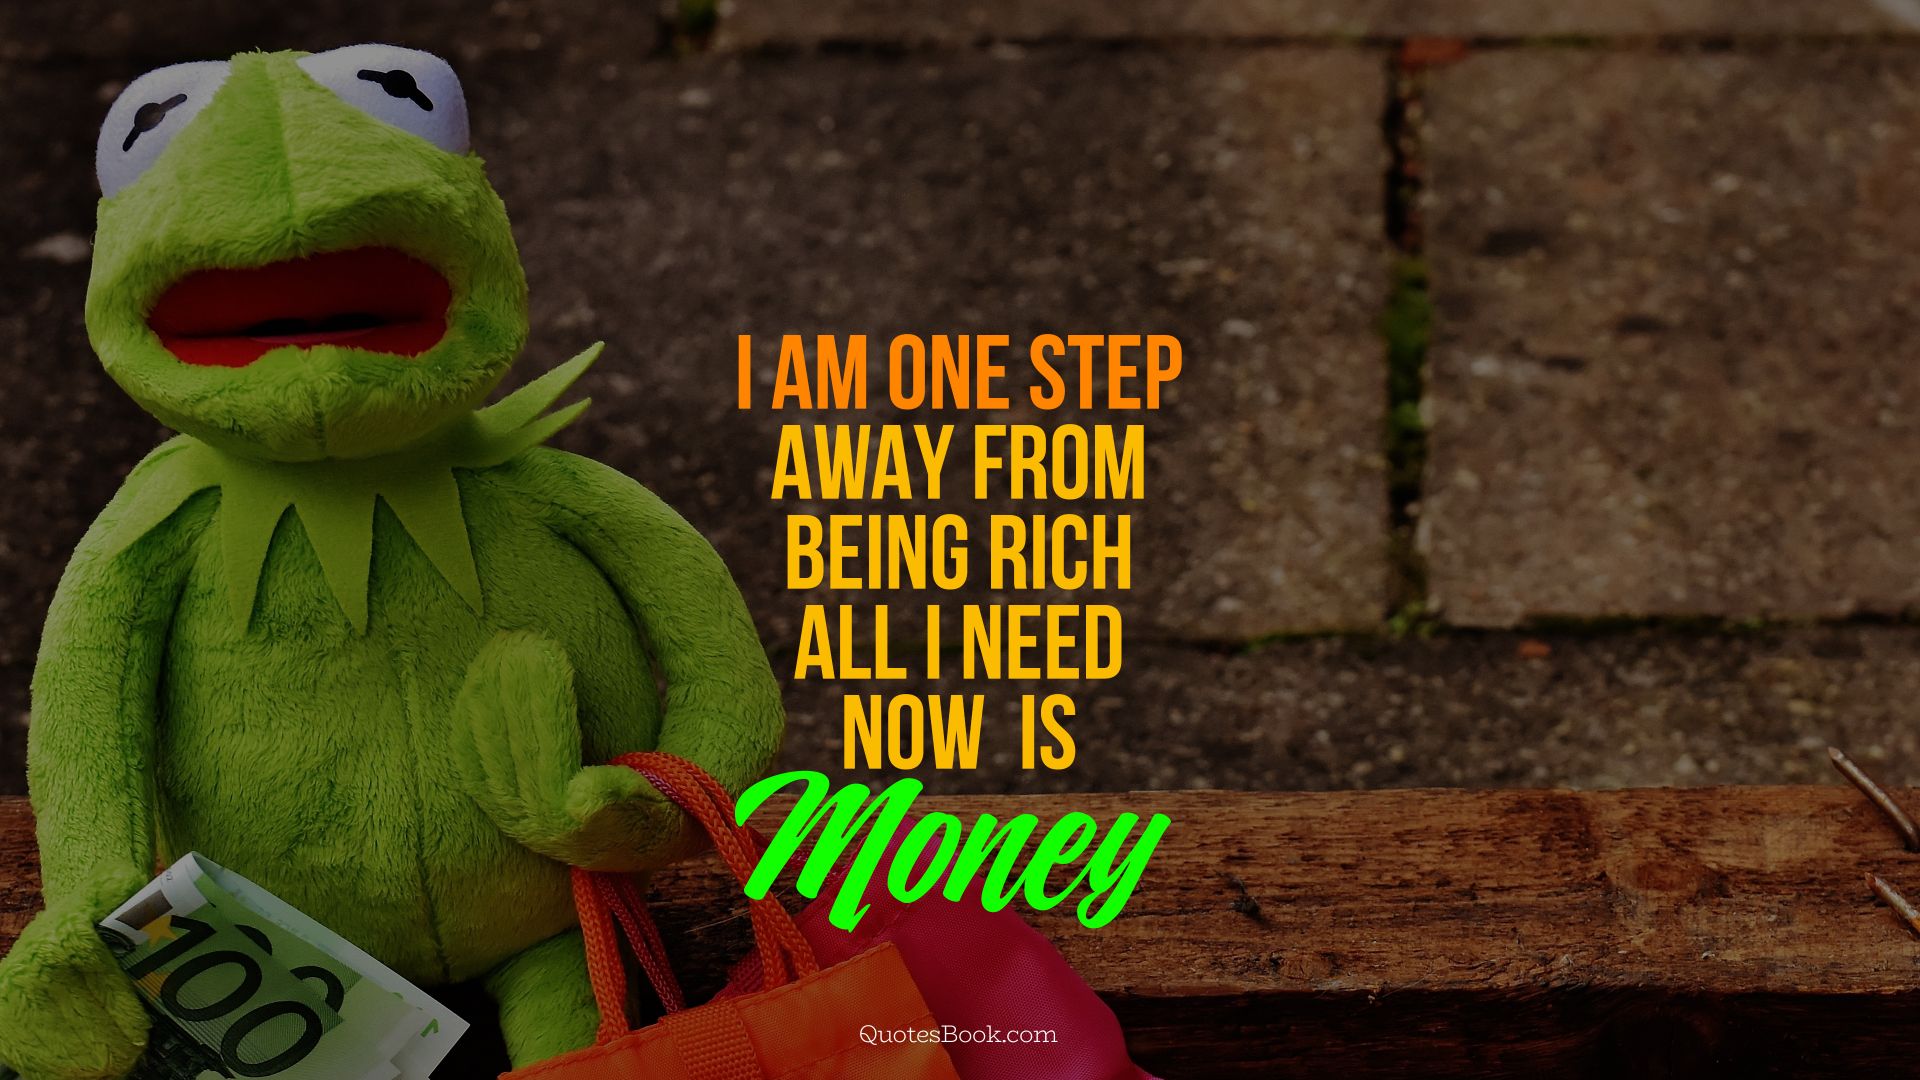 I am one step away from being rich, 
all I need now is money. - Quote by Pablo Picasso